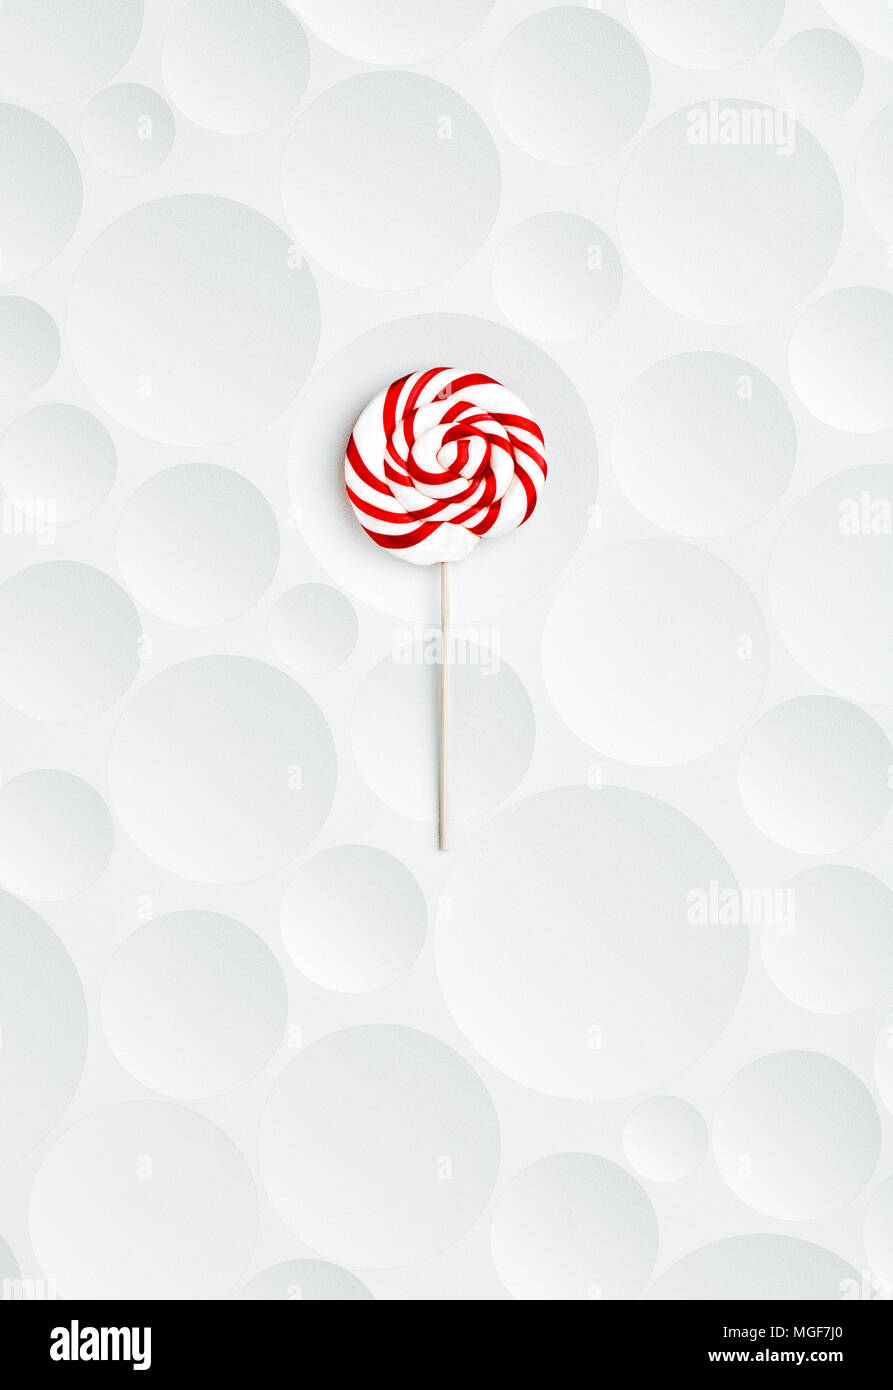 Red striped and spiral shaped lollipop on white and bubble textured background Stock Photo